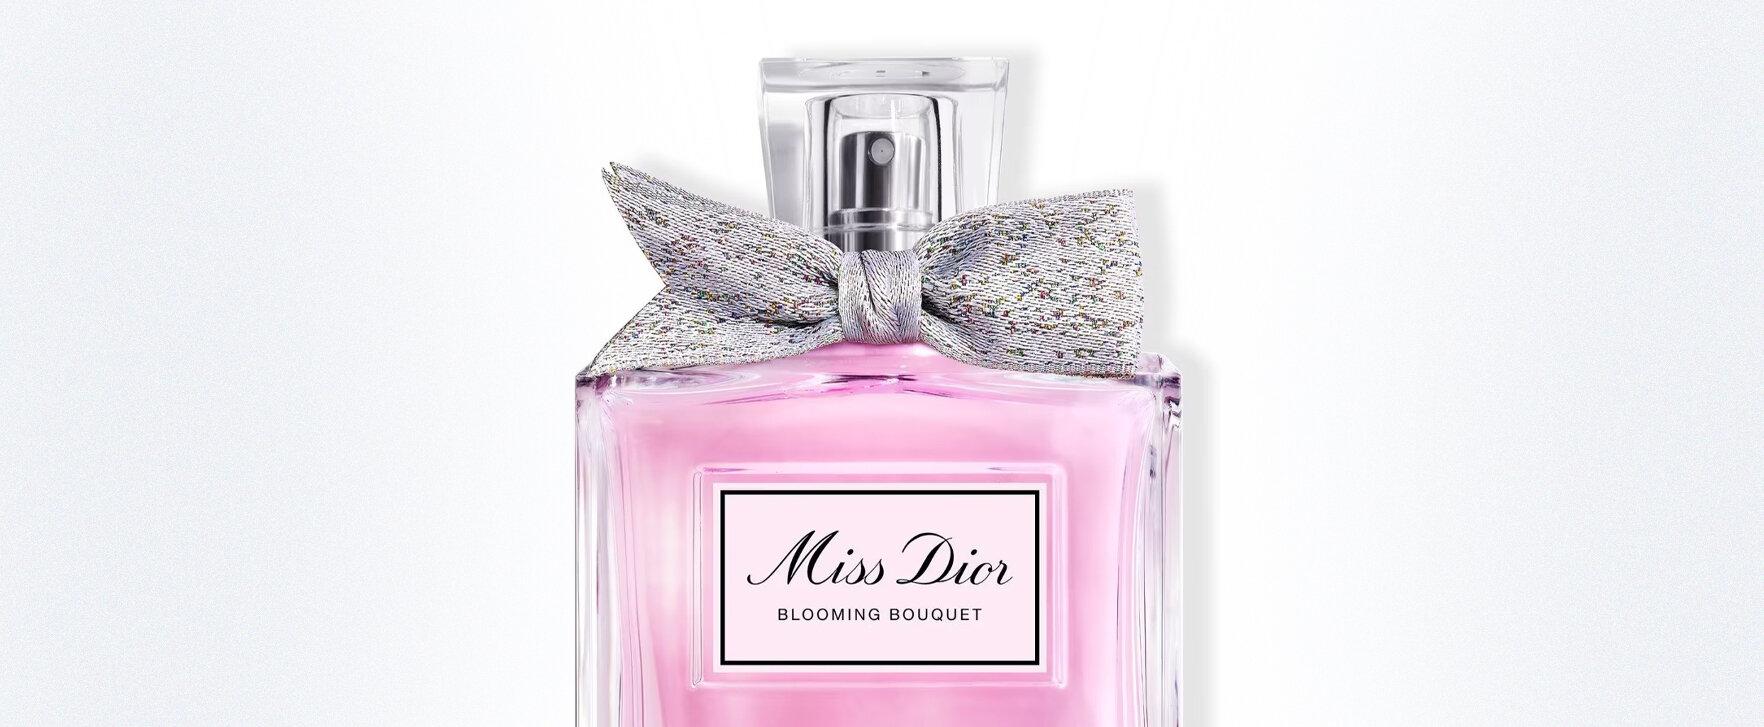 “Miss Dior Blooming Bouquet” Makes Another Comeback in 2023